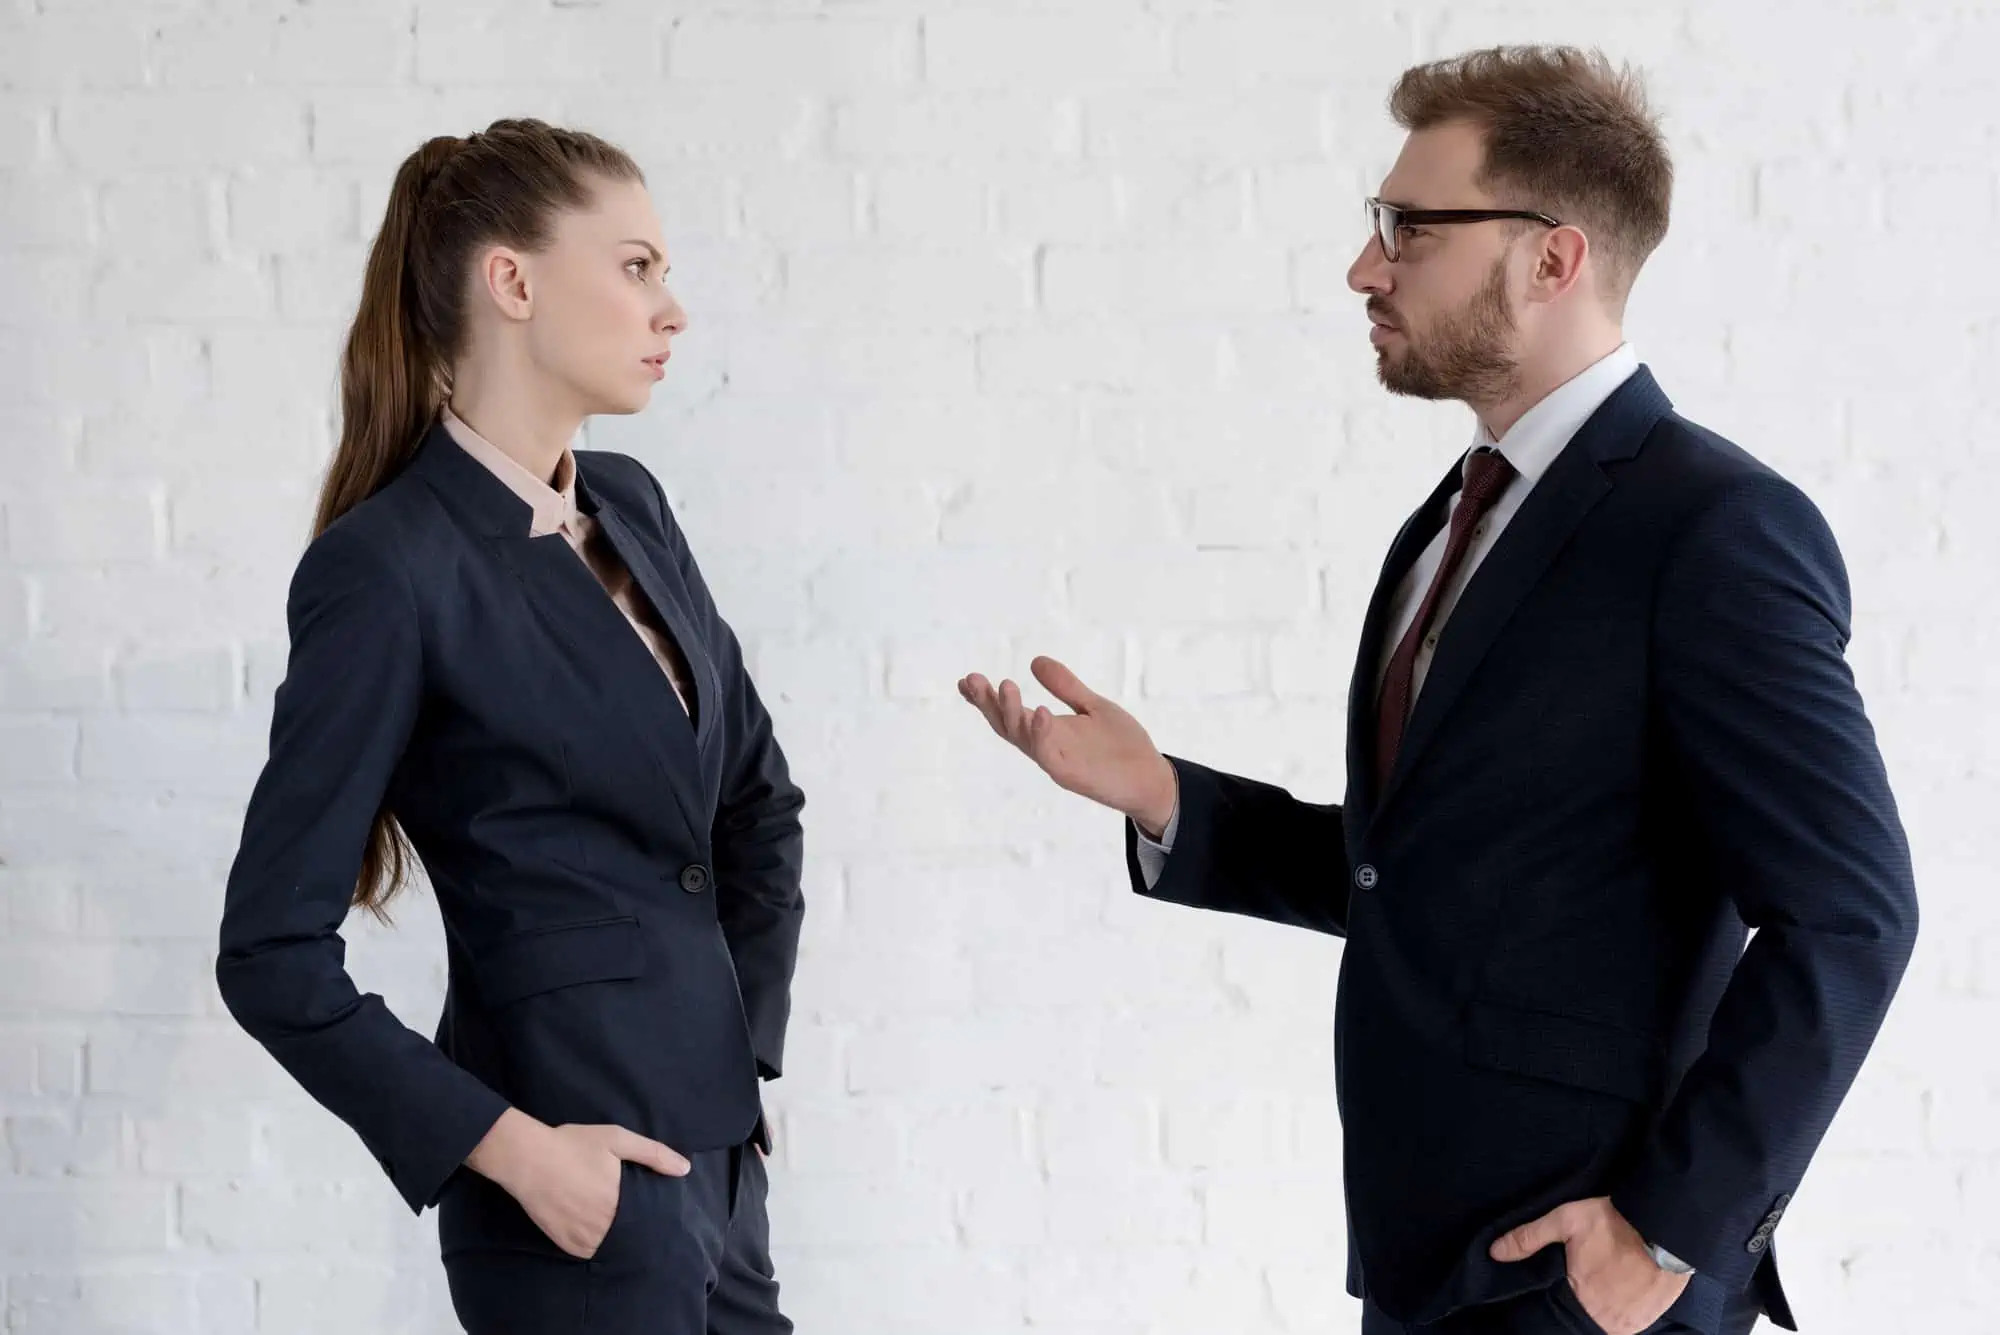 A man and a woman in business attire talking to each other